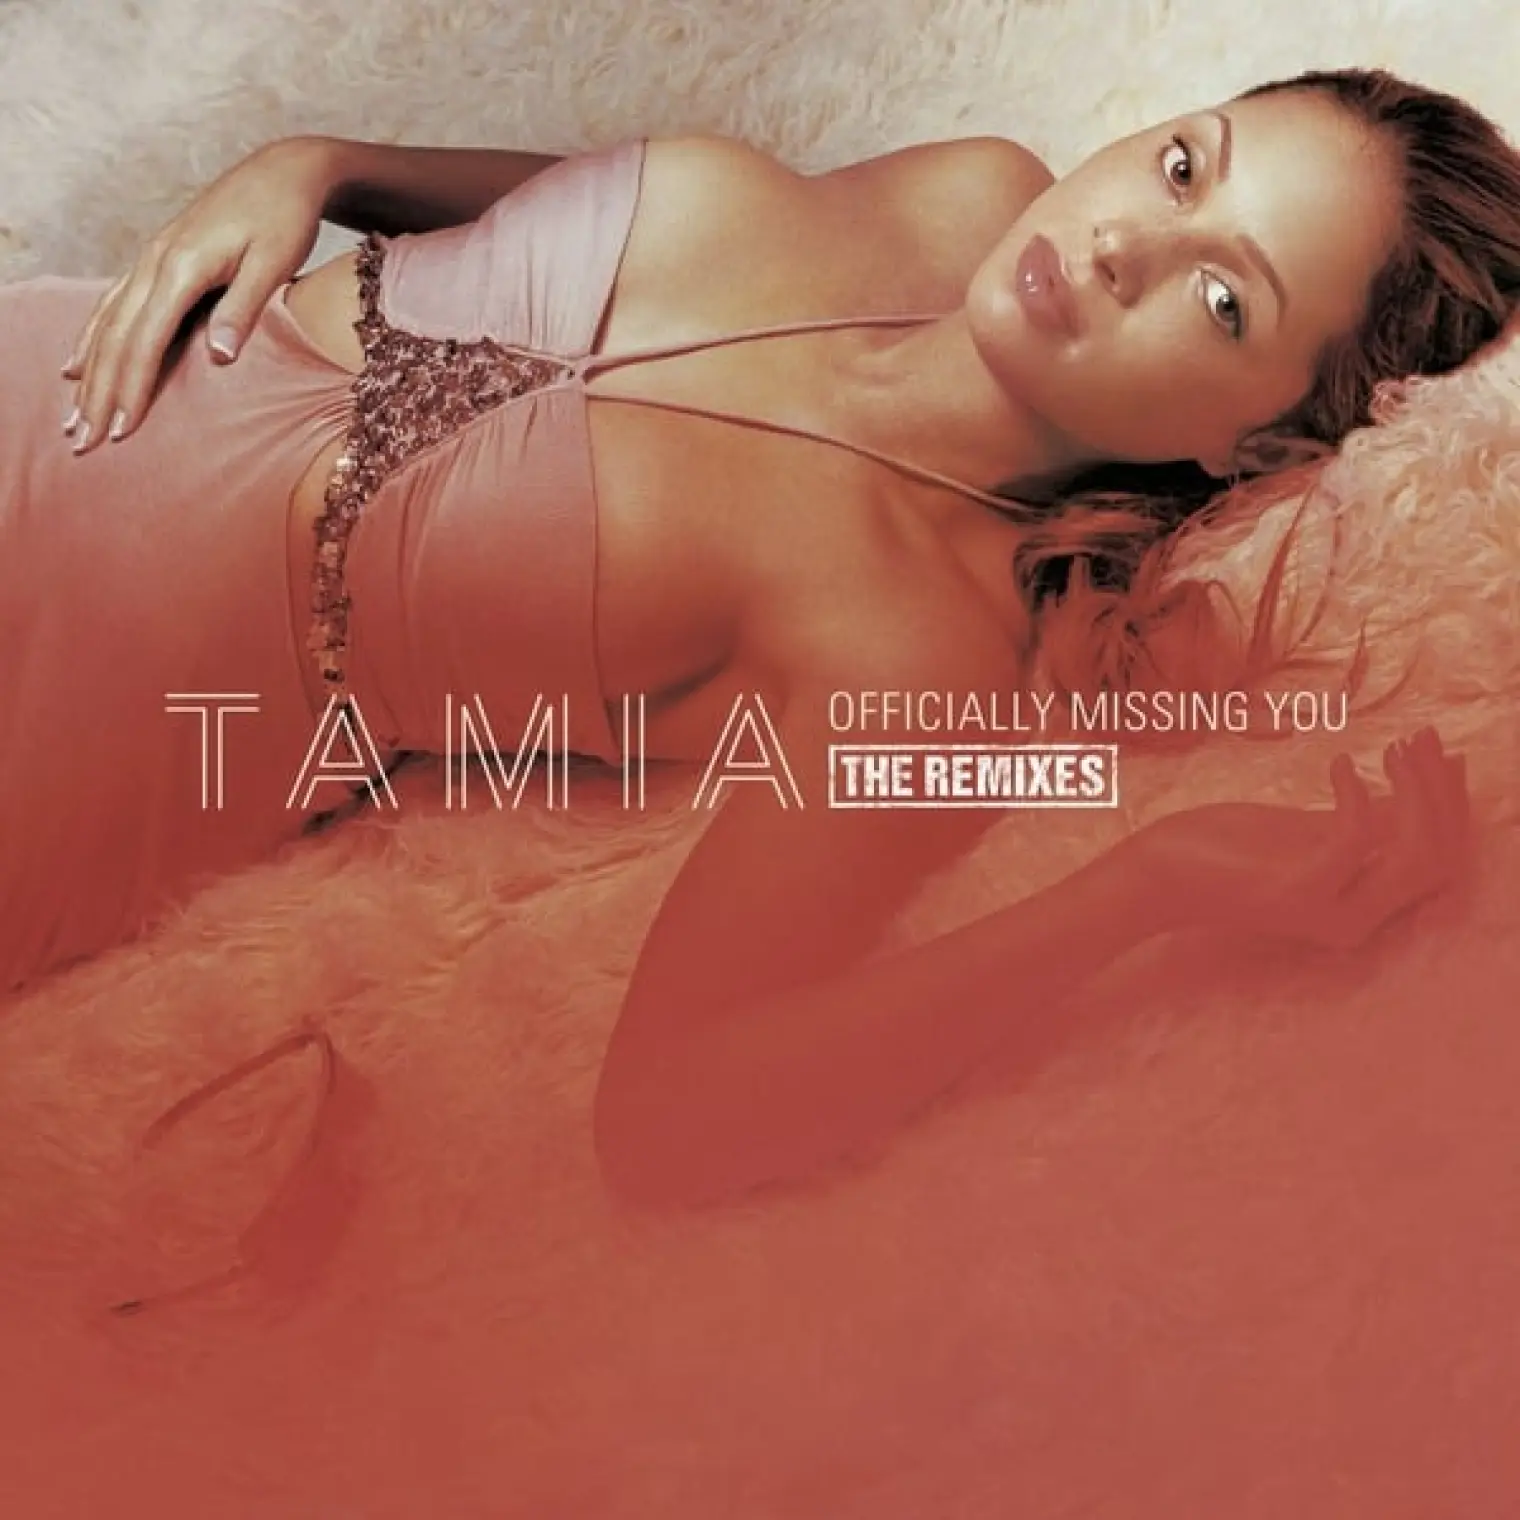 Officially Missing You (U.S. CD Maxi Single Remixes) -  Tamia 